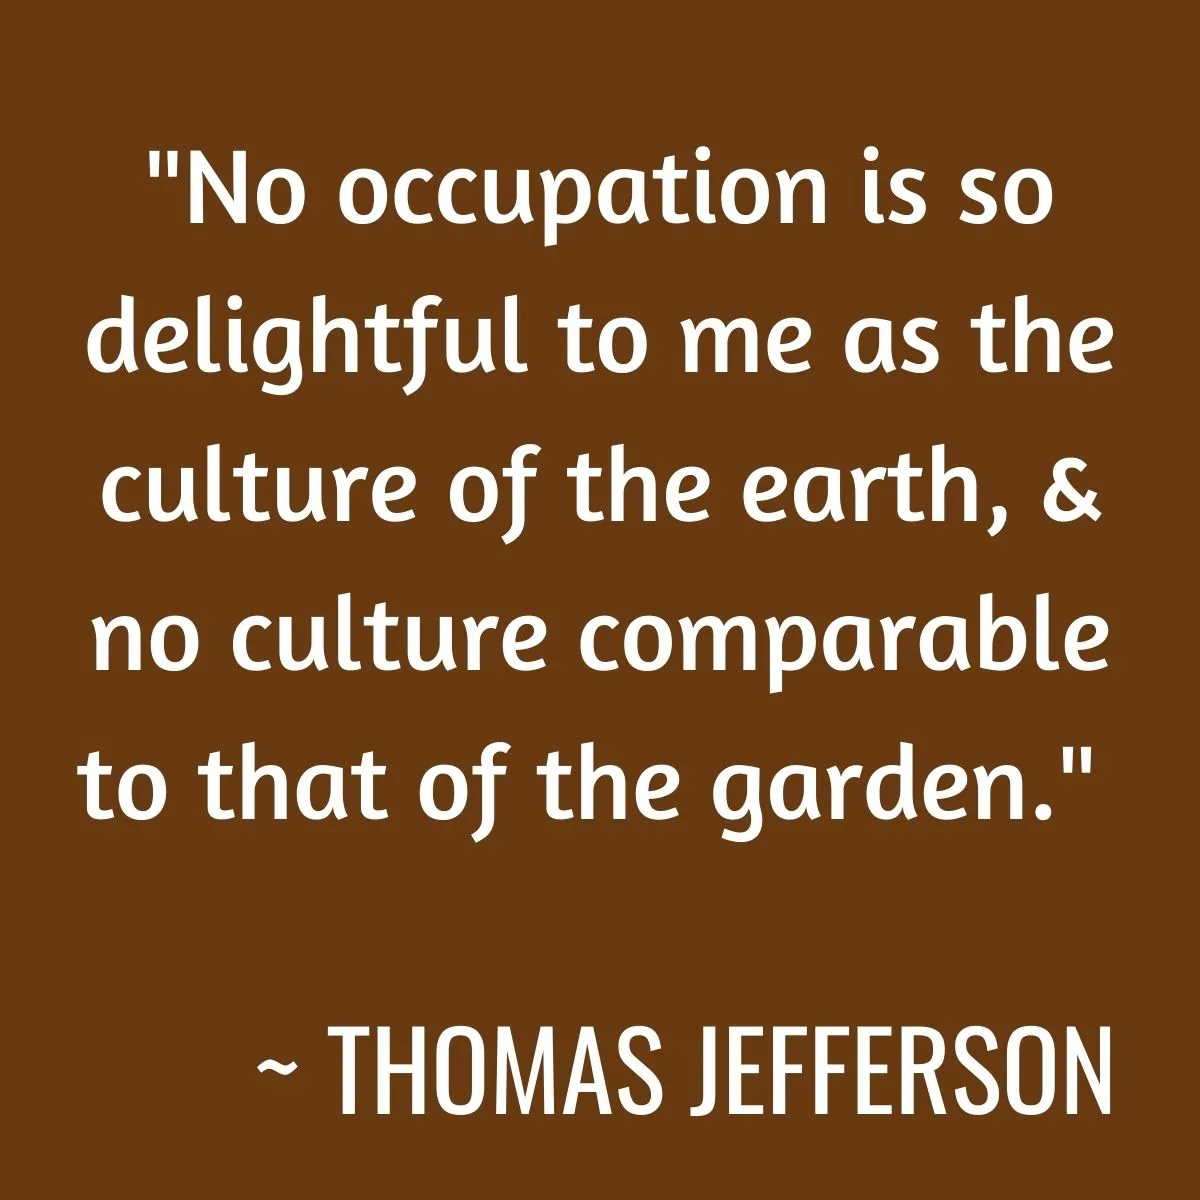 No occupation is so delightful to me as the culture of the earth, no culture comparable to that of the garden.